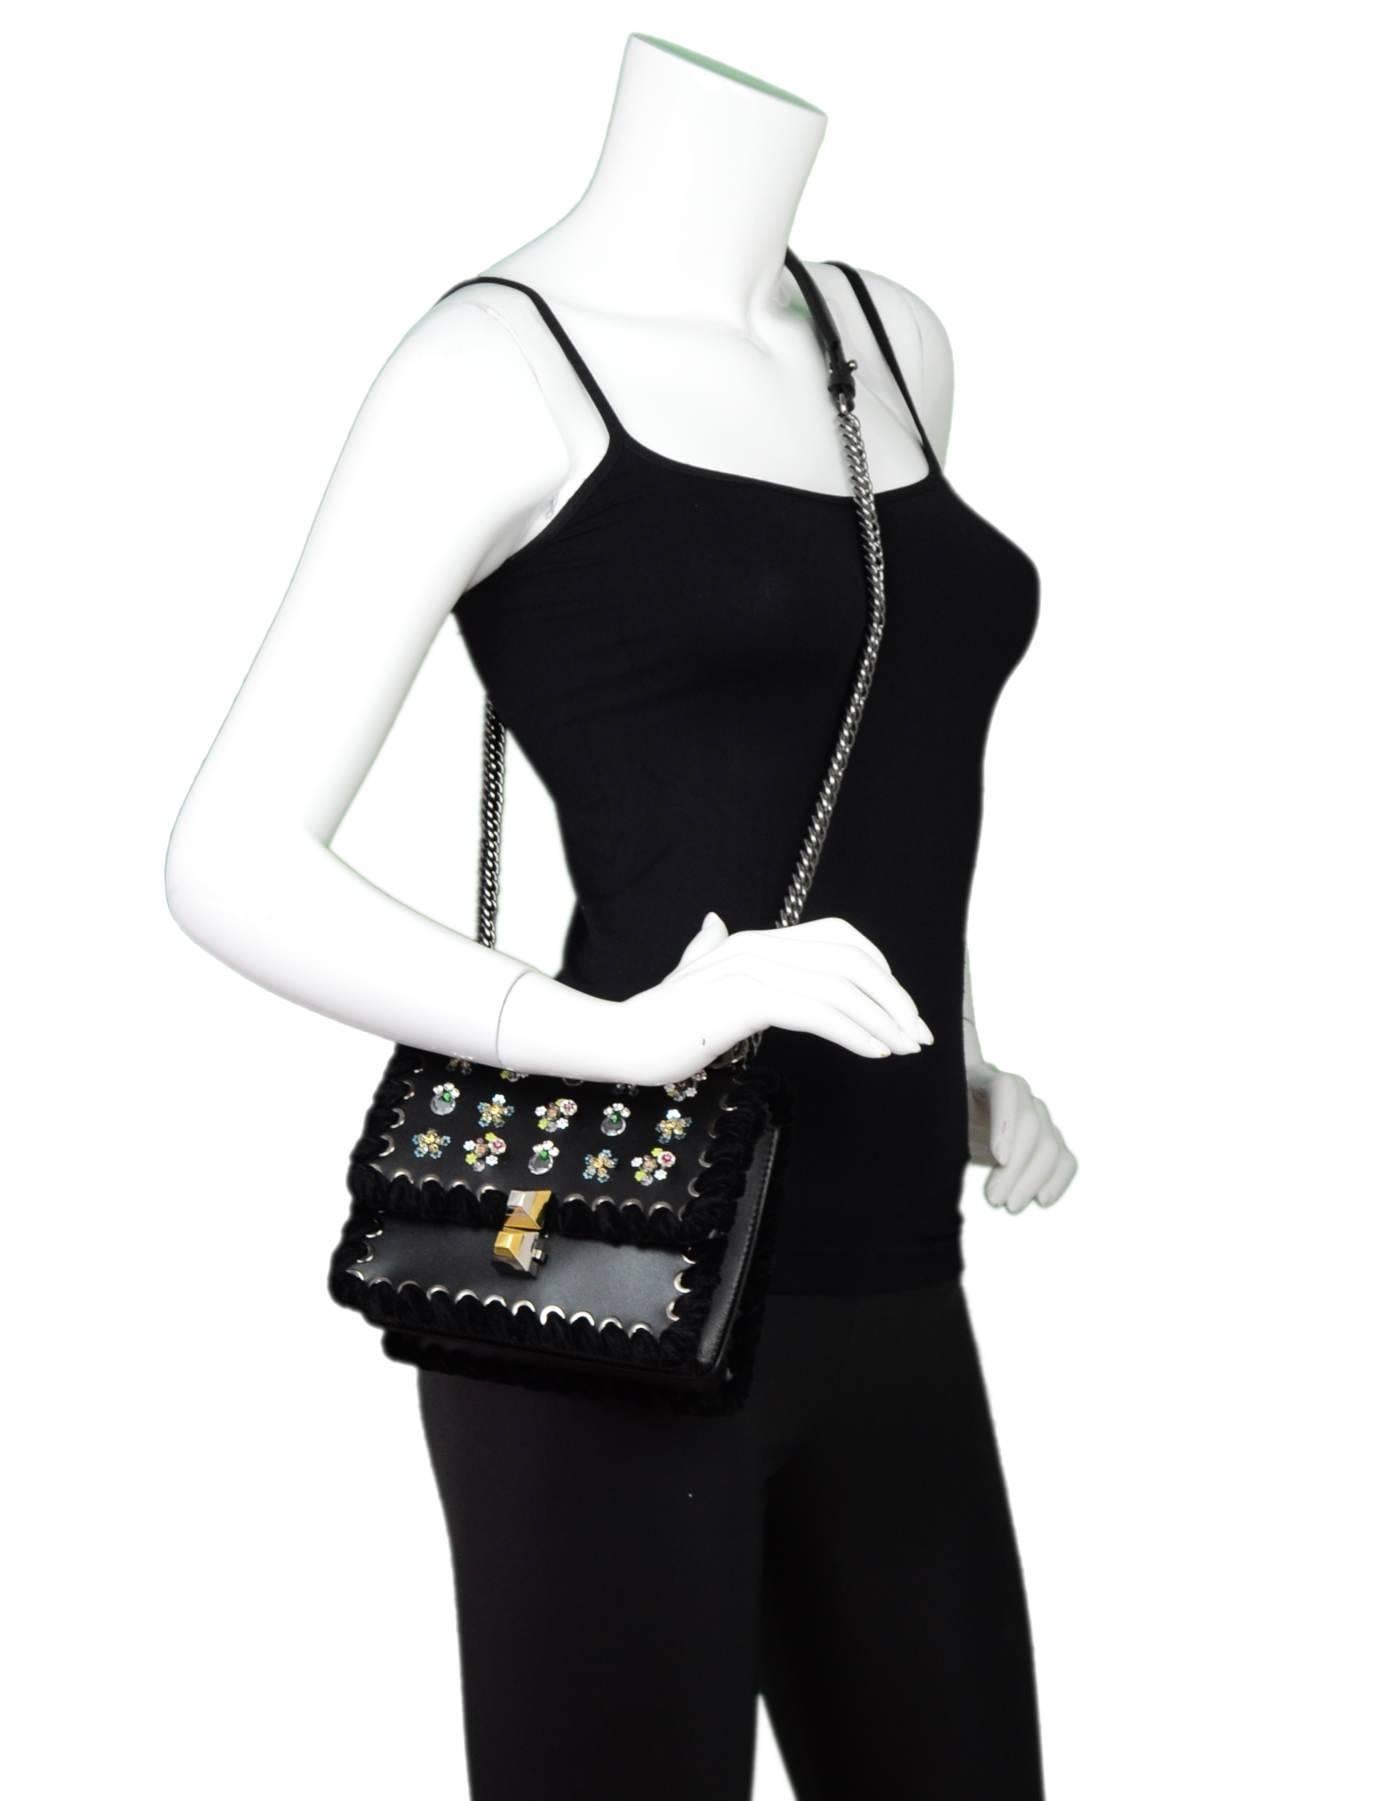 Fendi Black Leather Kan I Mini Whipstitch Stones Bag
Features calfskin leather, velvet whip-stitch and floral embroidery

Made In: Italy
Color: Black
Hardware: Silvertone
Materials: Leather, velvet
Lining: Black textile
Closure/Opening: Flap top